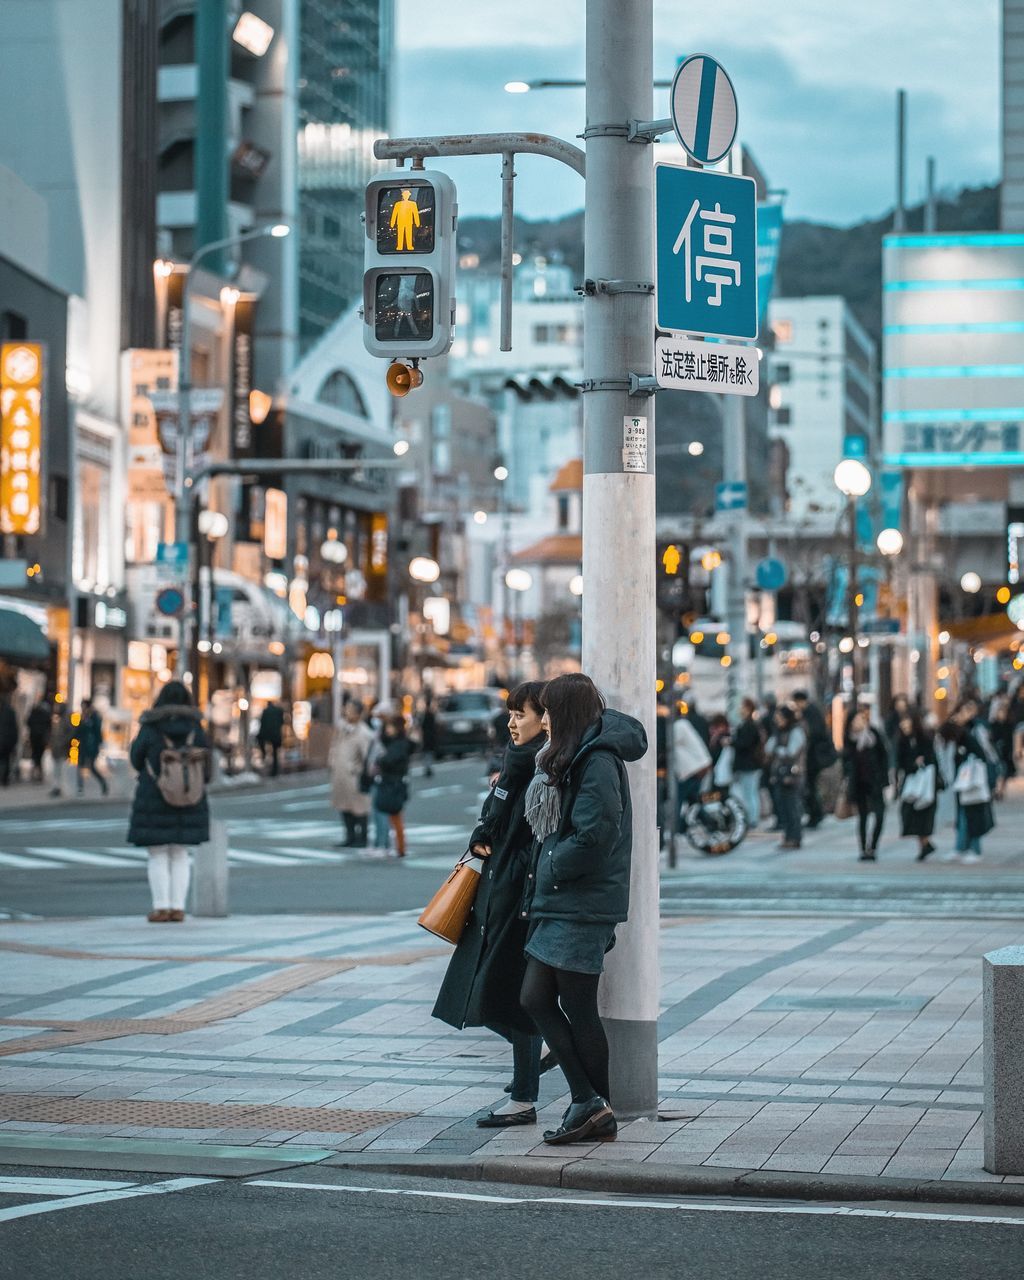 city, sign, street, architecture, transportation, crosswalk, crossing, real people, city life, zebra crossing, road, stoplight, building exterior, lifestyles, incidental people, one person, road marking, walking, built structure, full length, city street, light, outdoors, waiting